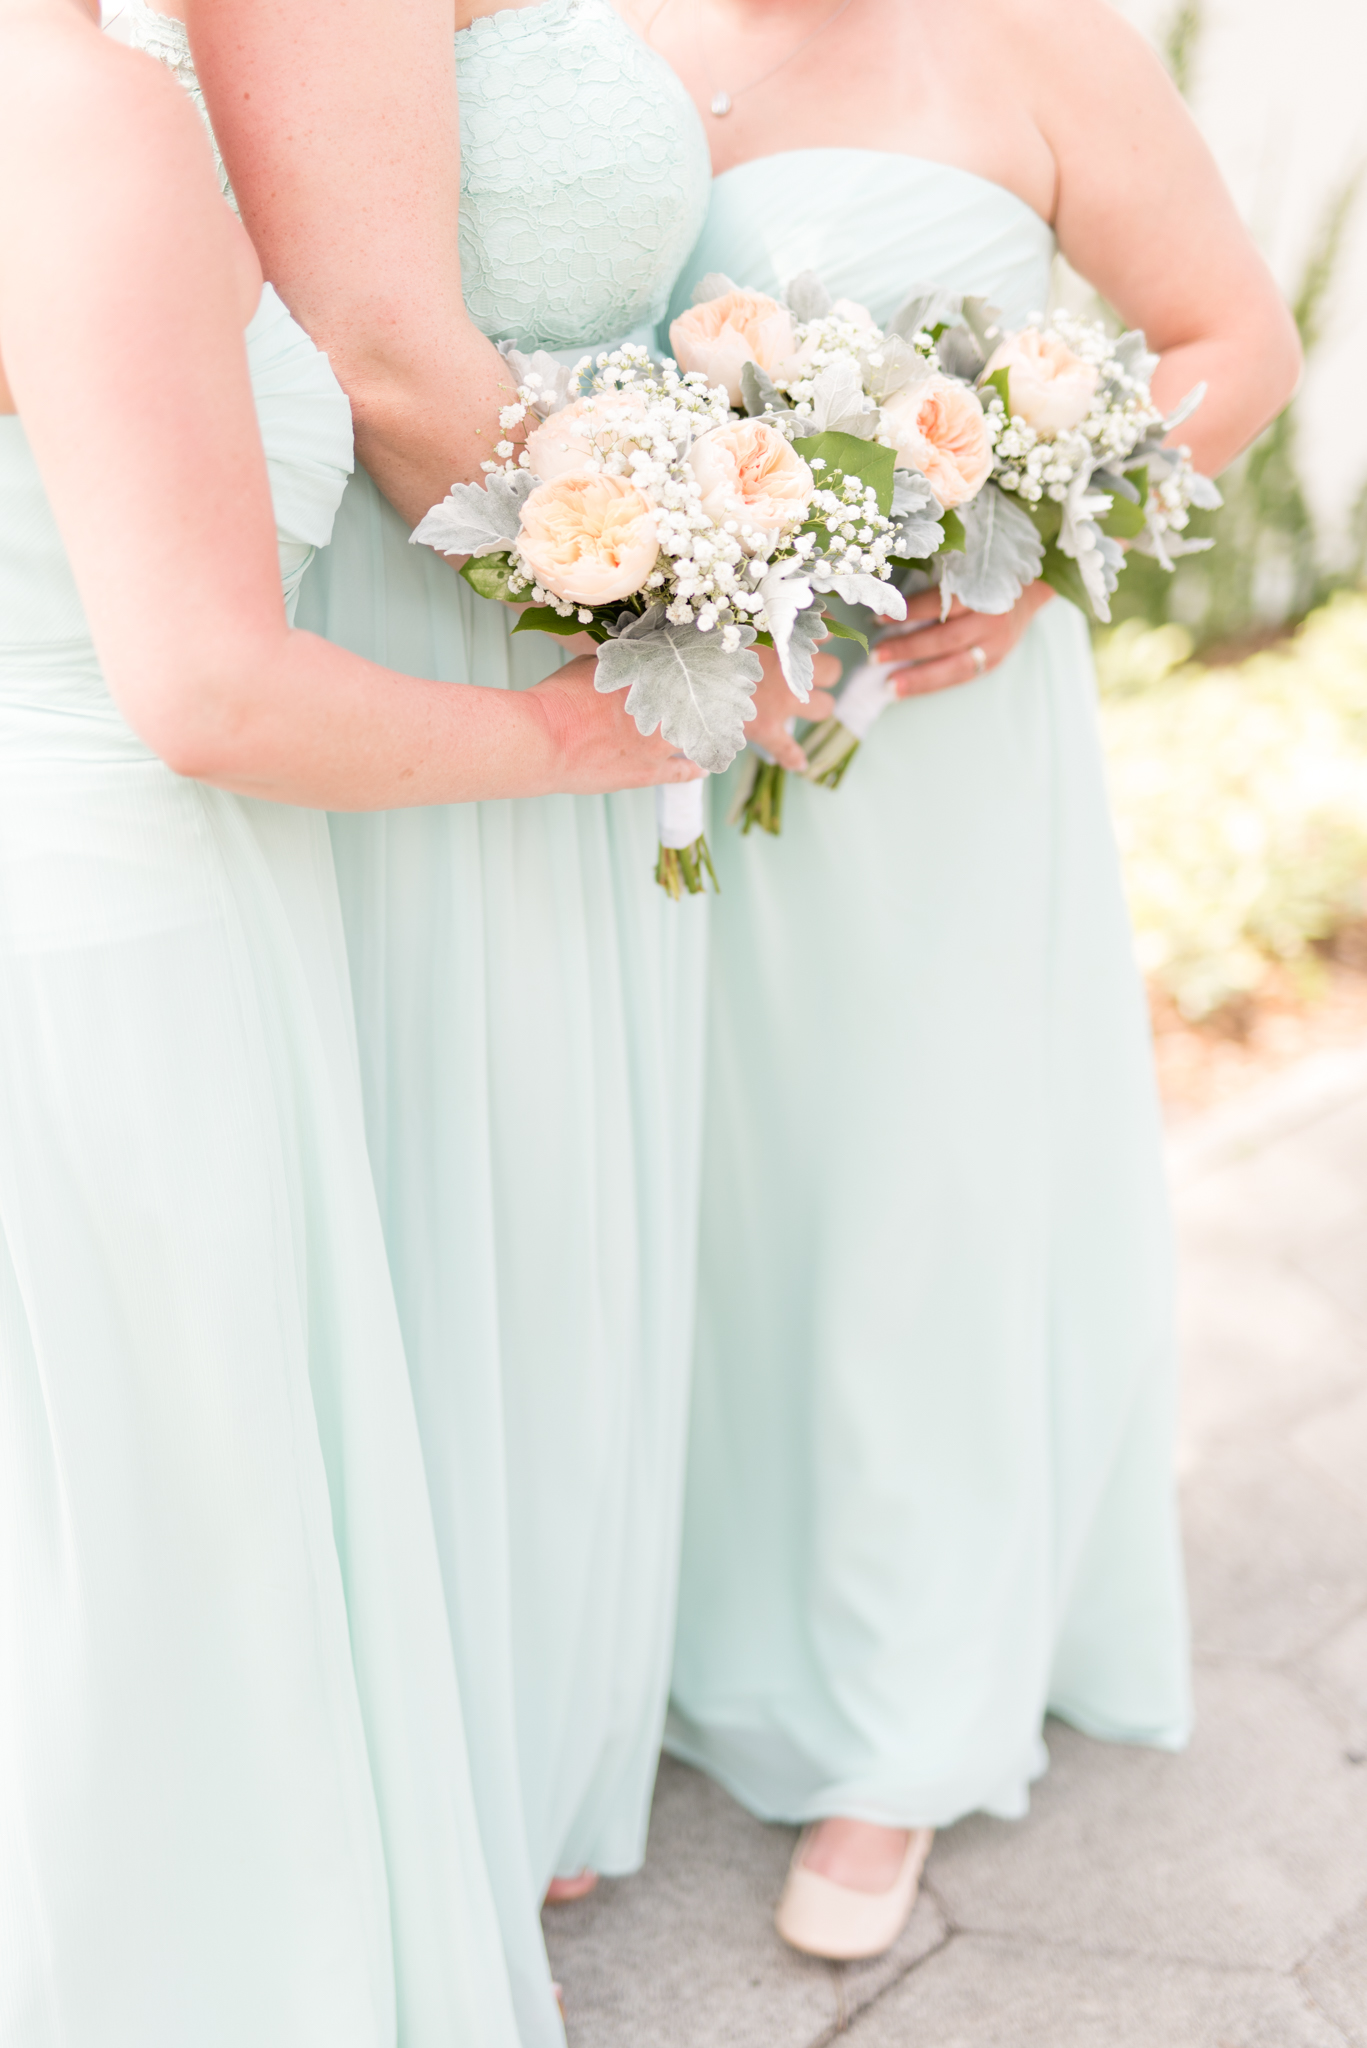 Bridemaids hold bouquets.